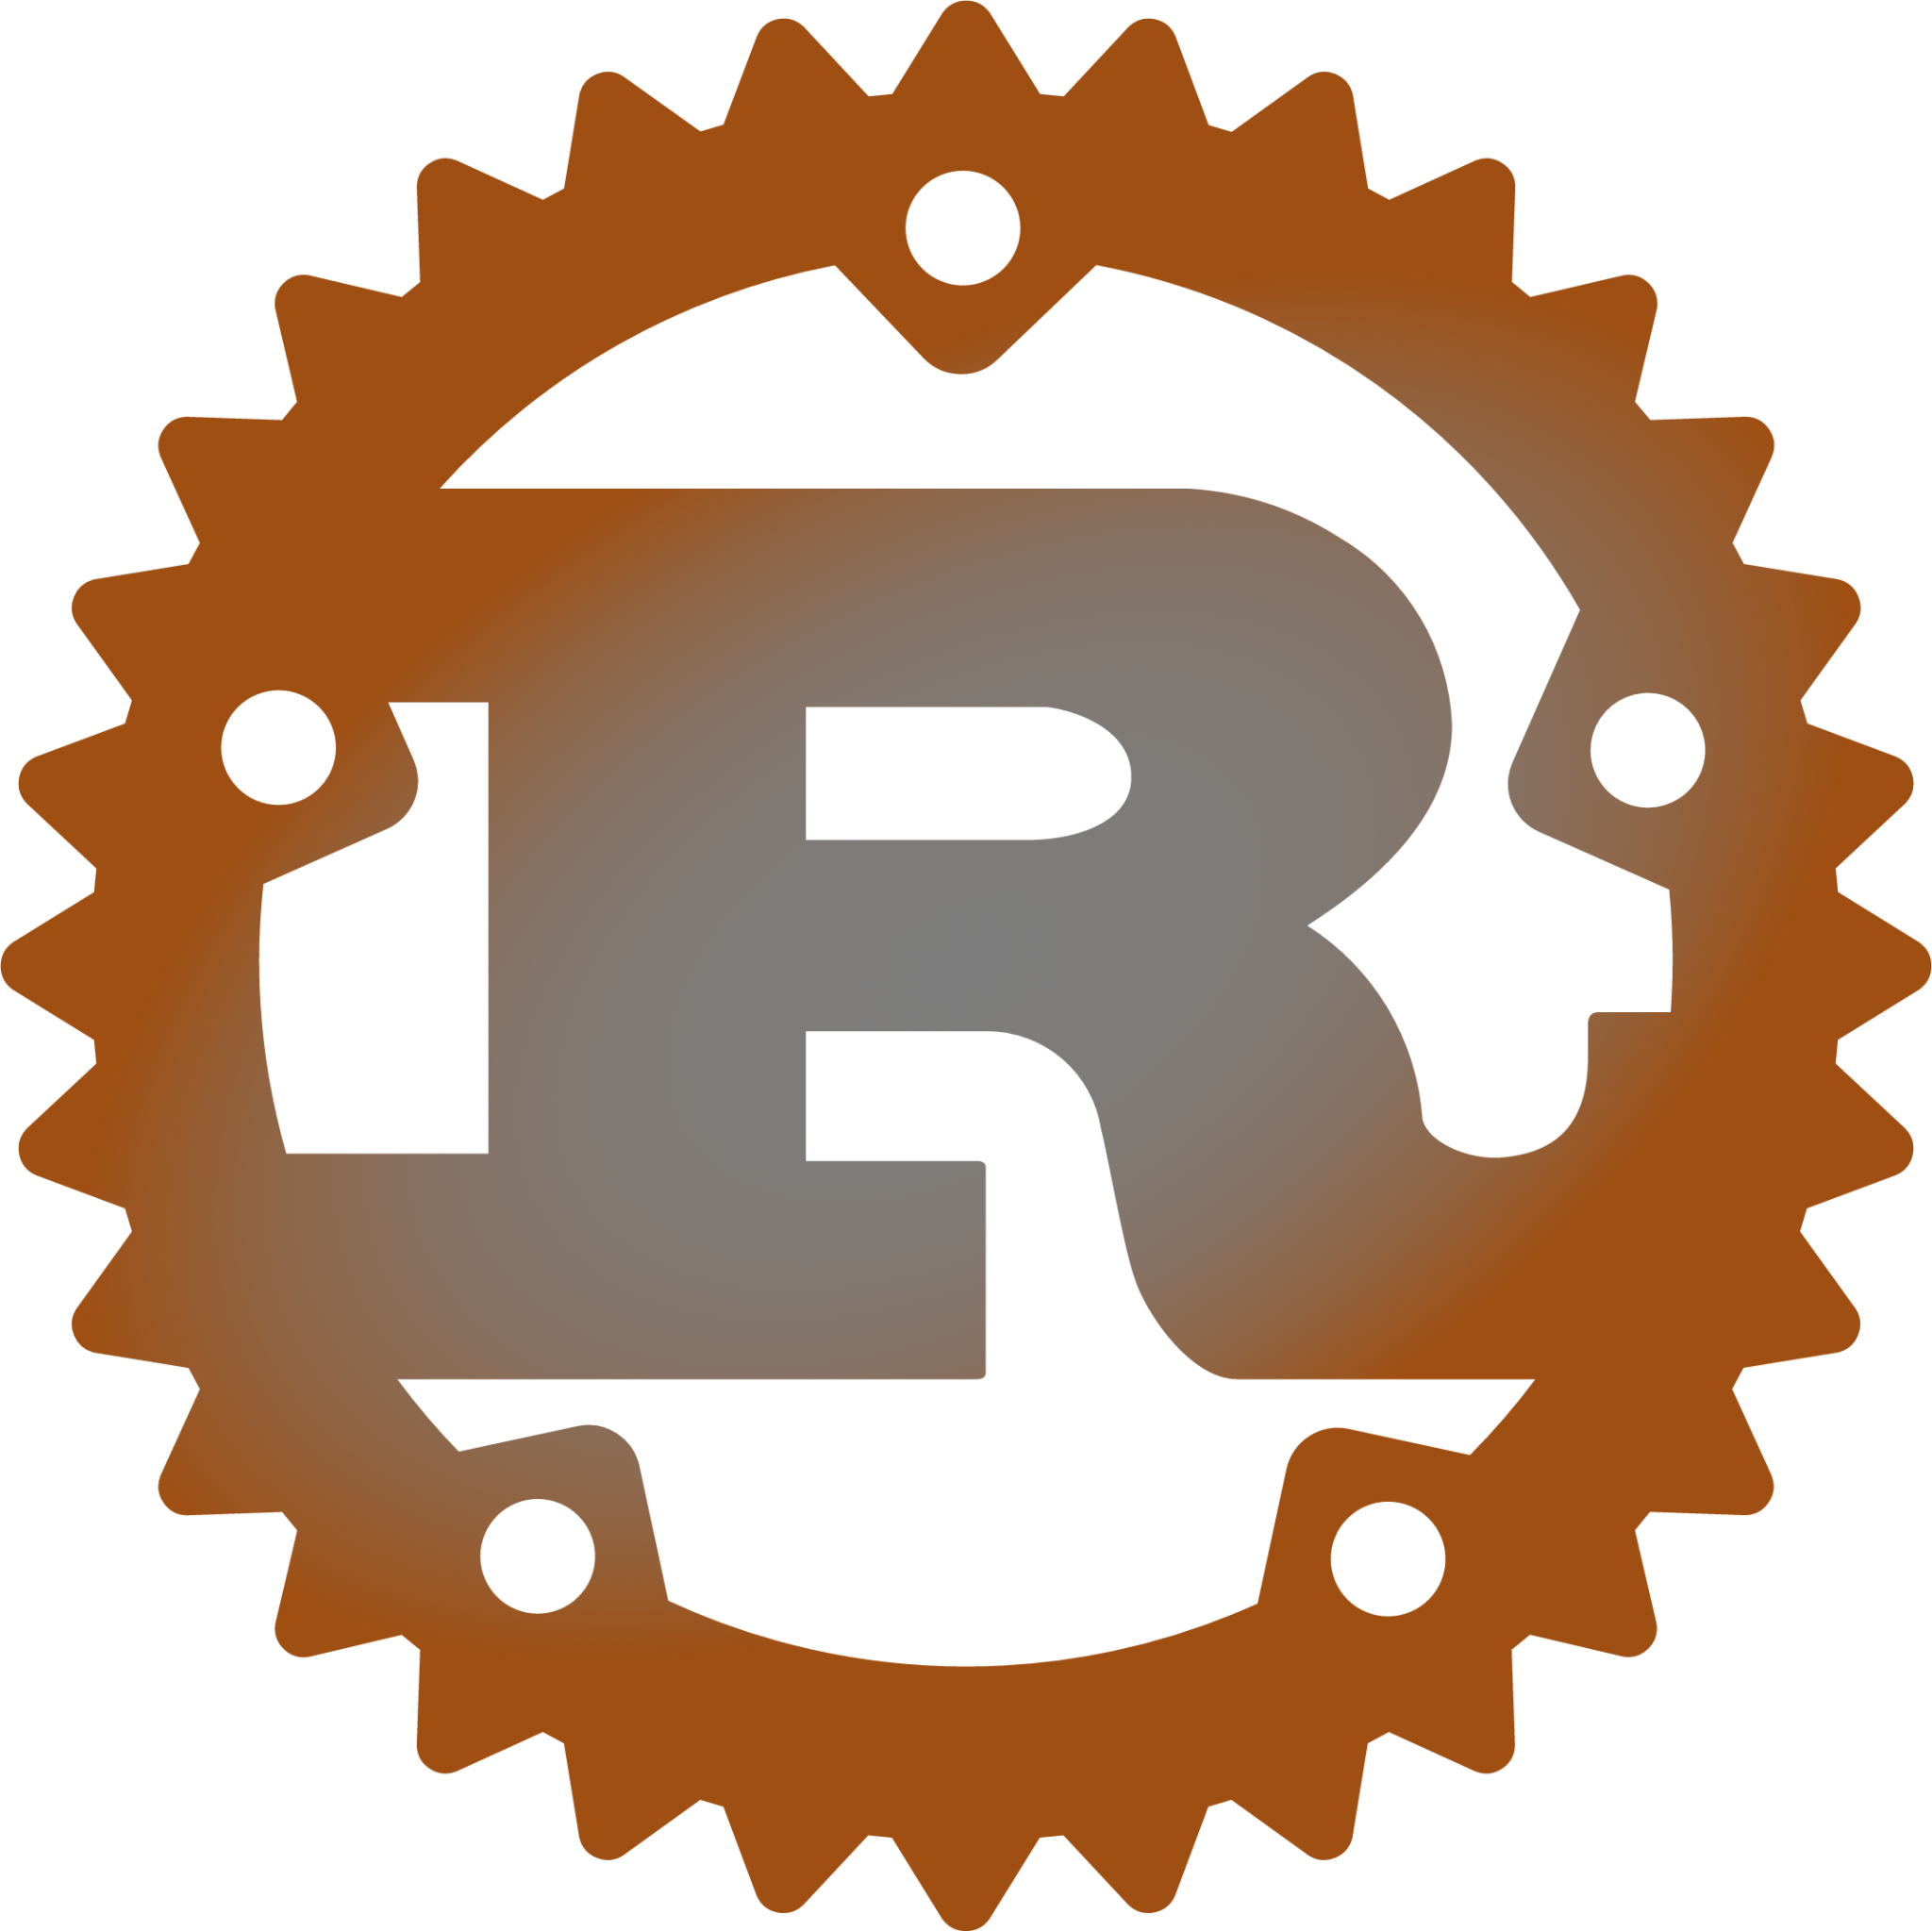 file type rust icon